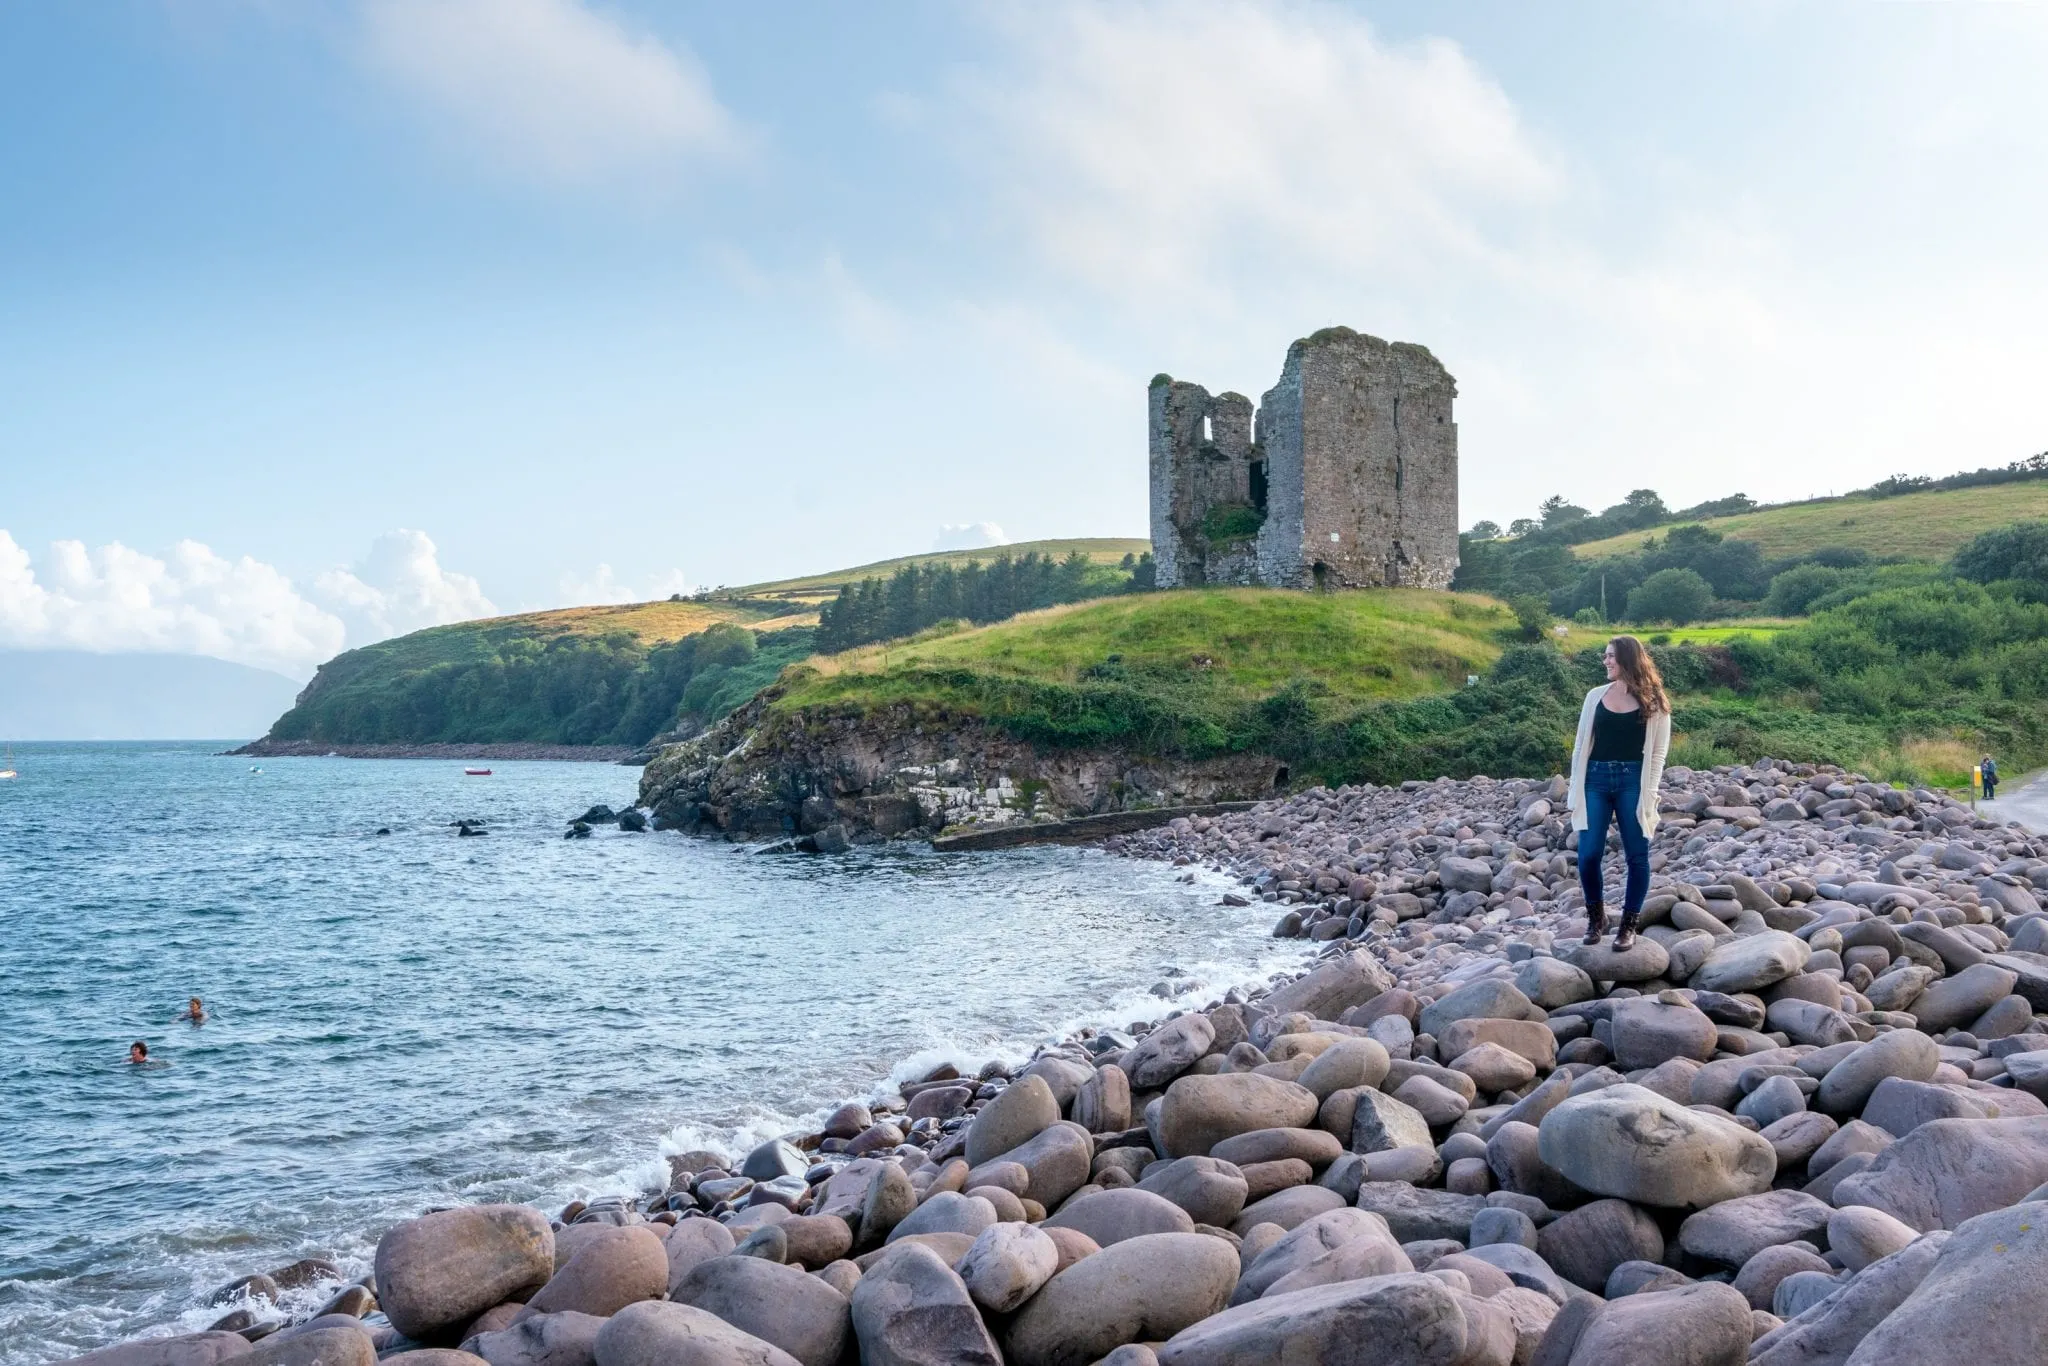 Kate Storm standing on a pebble beach on Dingle Peninsula, Ireland. Minard Castle is behind her. This is a great example of what to wear in Ireland!